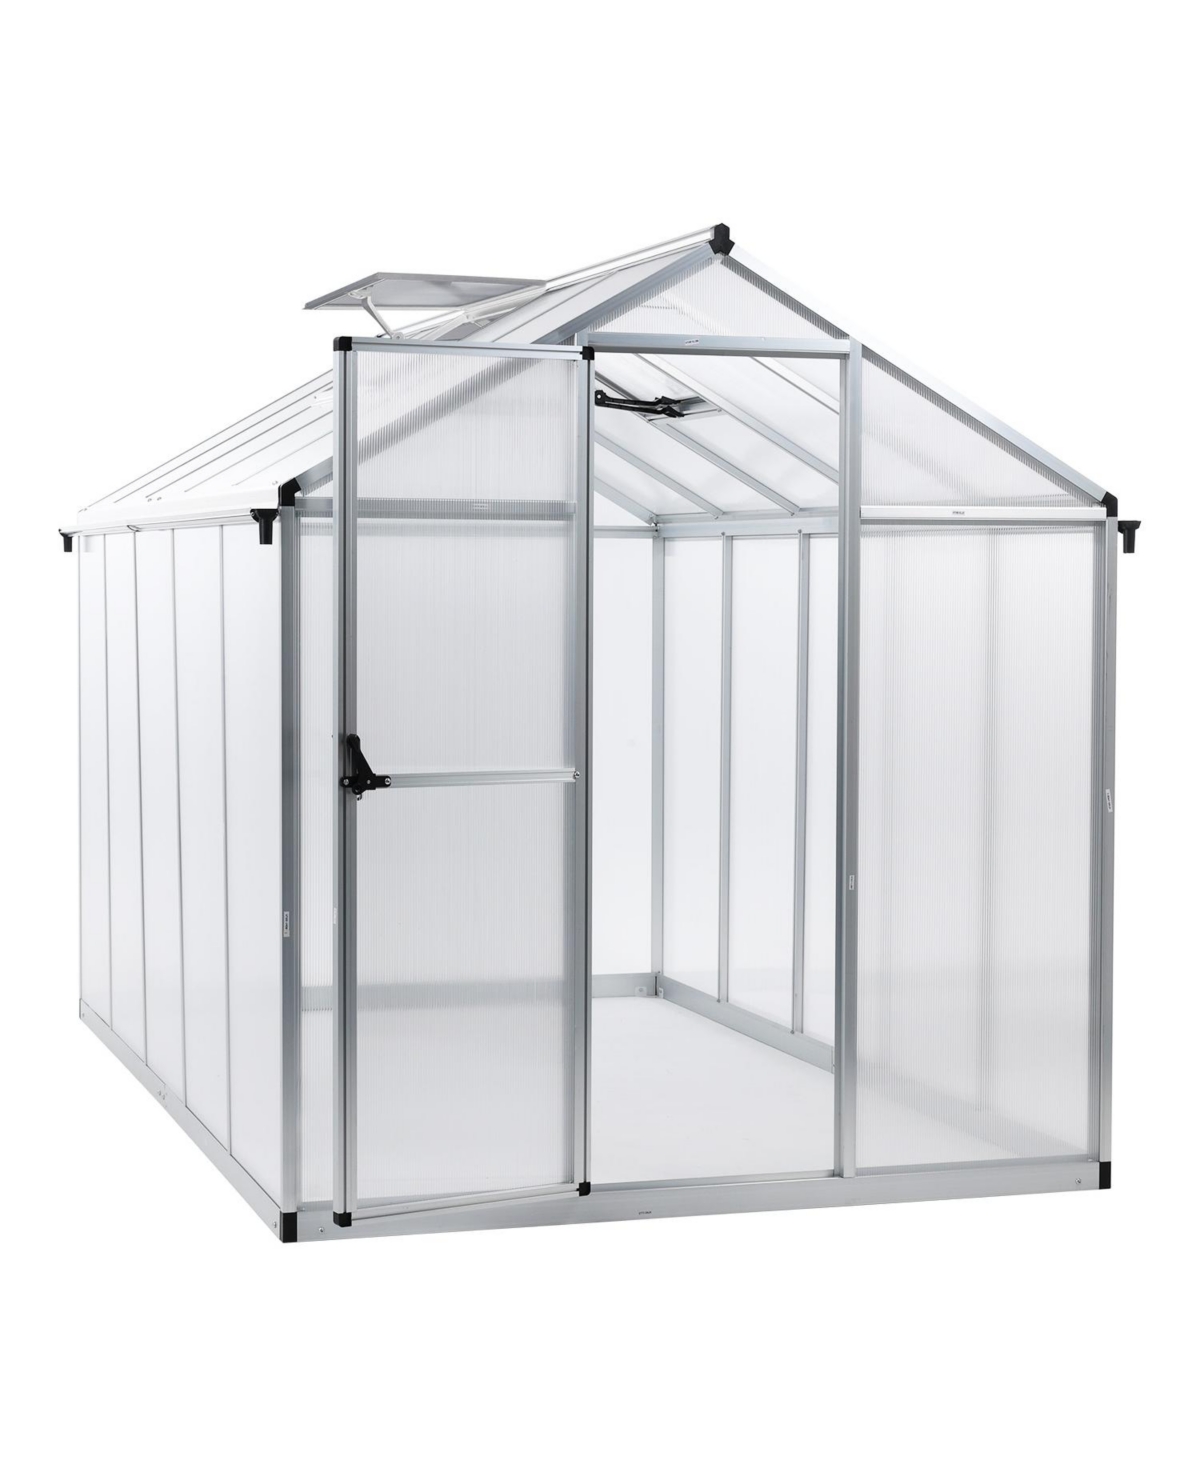 77''x120''x81'' Walk-in Greenhouse Polycarbonate Panel Hobby Greenhouses with Aluminum Frame Heavy Duty with 2 Vent Windows & Lockable Door for